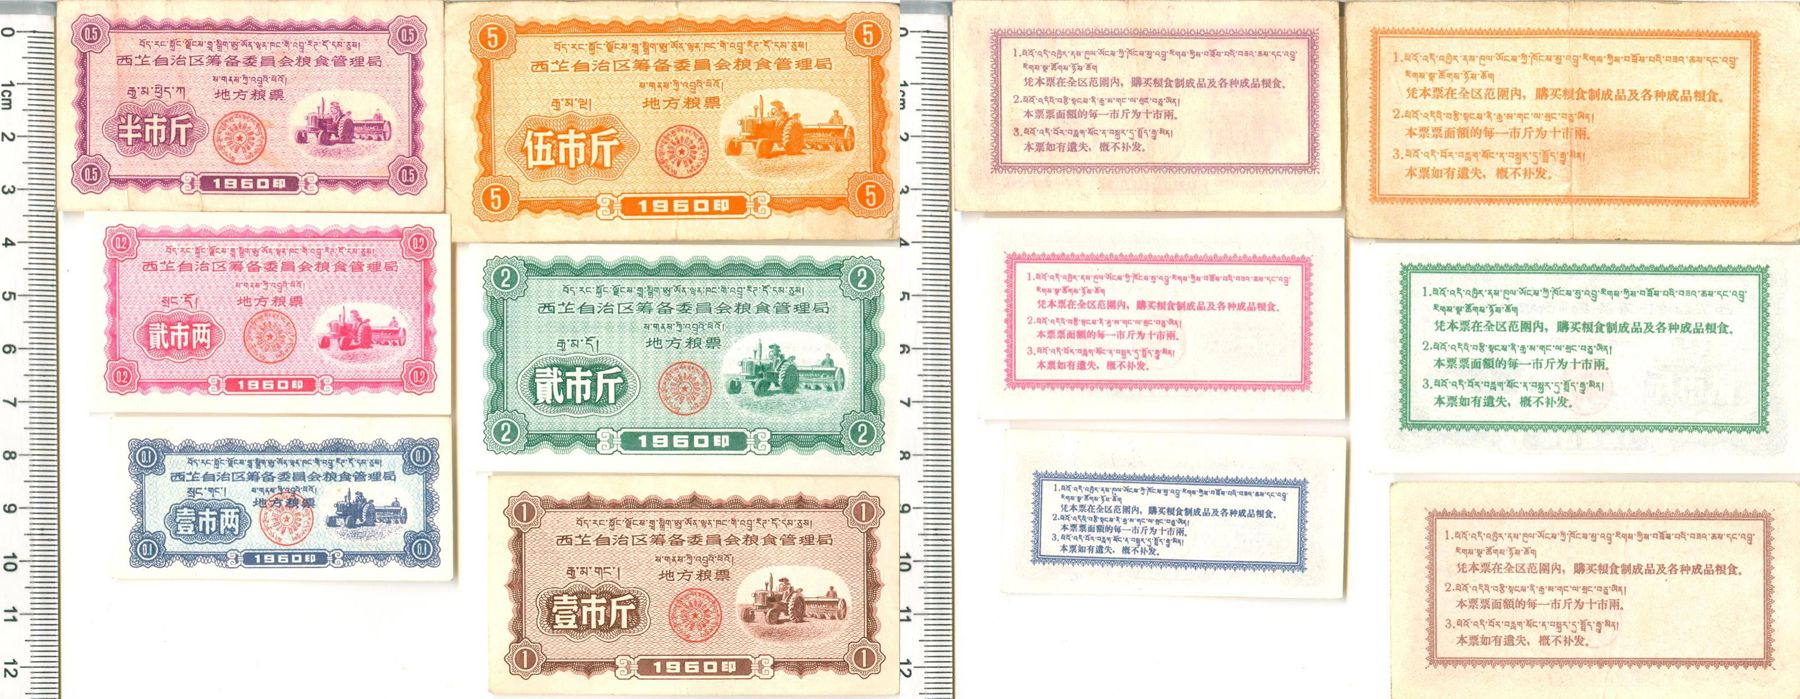 H7020, Tibet First Issue Food Ration Coupons, 6 Pcs, 1960 Rare - Click Image to Close